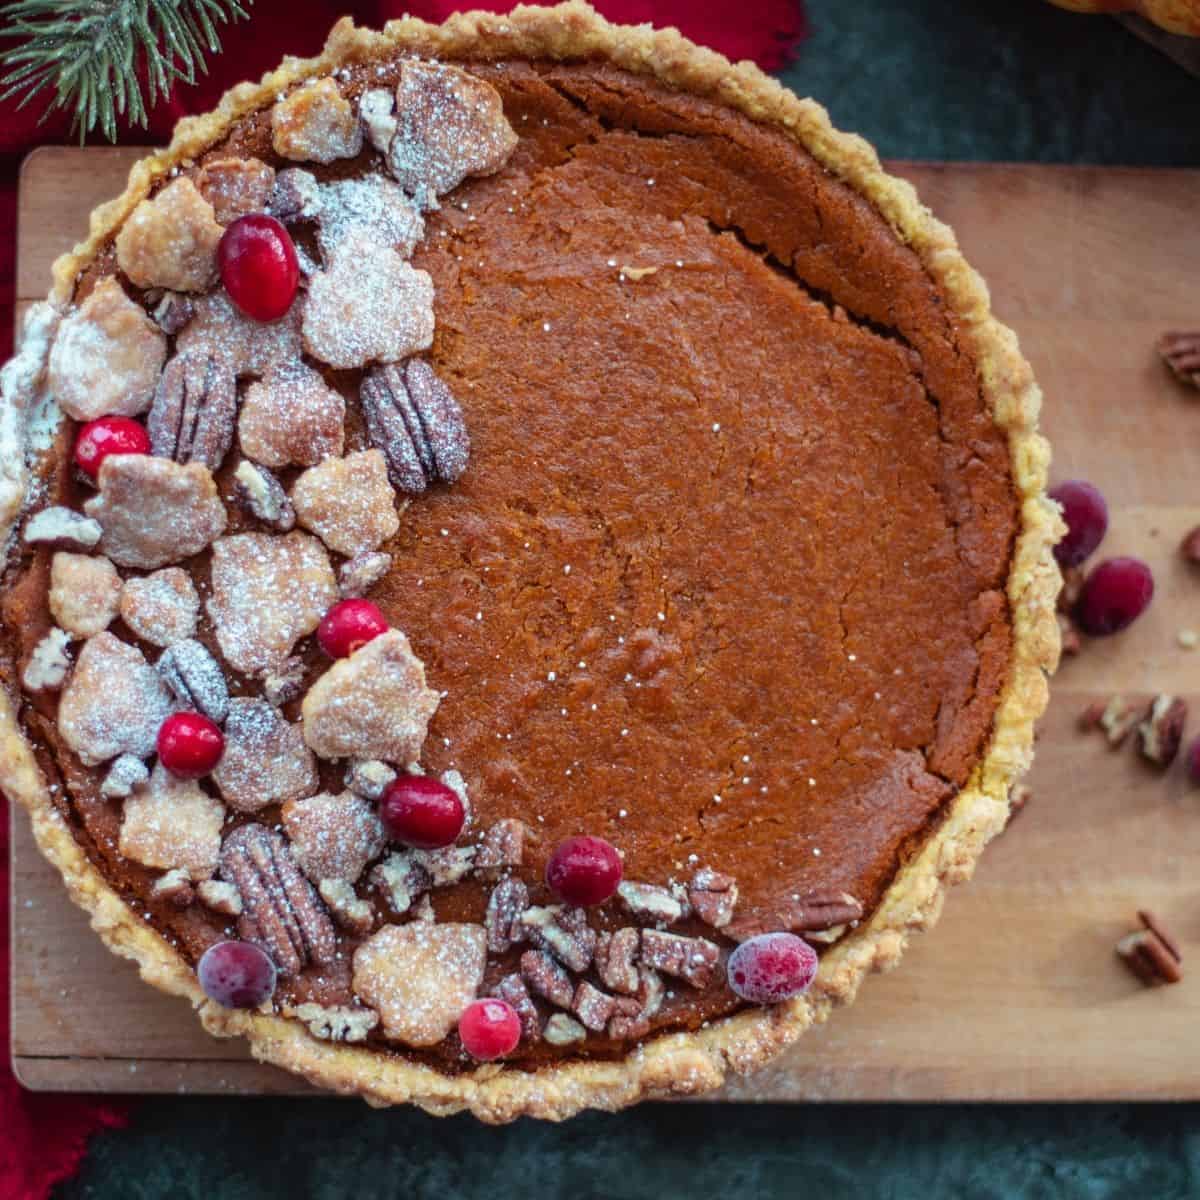 A vegan pumpkin pie decorated with cranberries and pecans